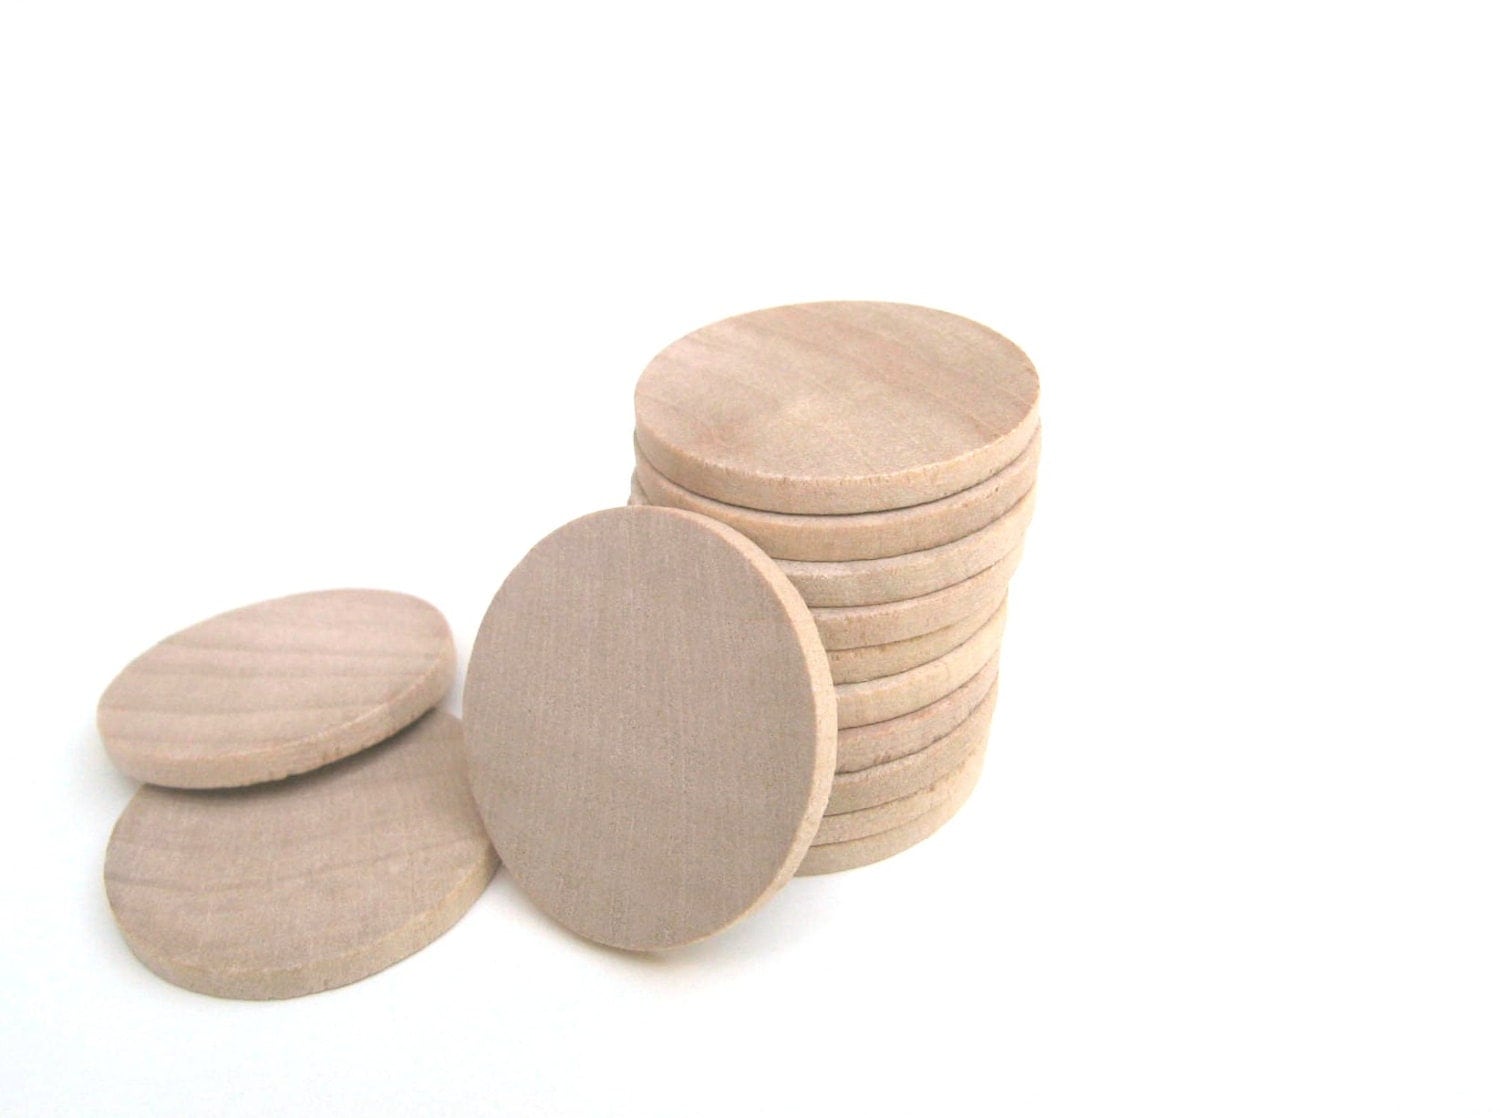 50 1 1/4 Unfinished Wood Circles 1 1/4 Inch by ShauneilSupplies